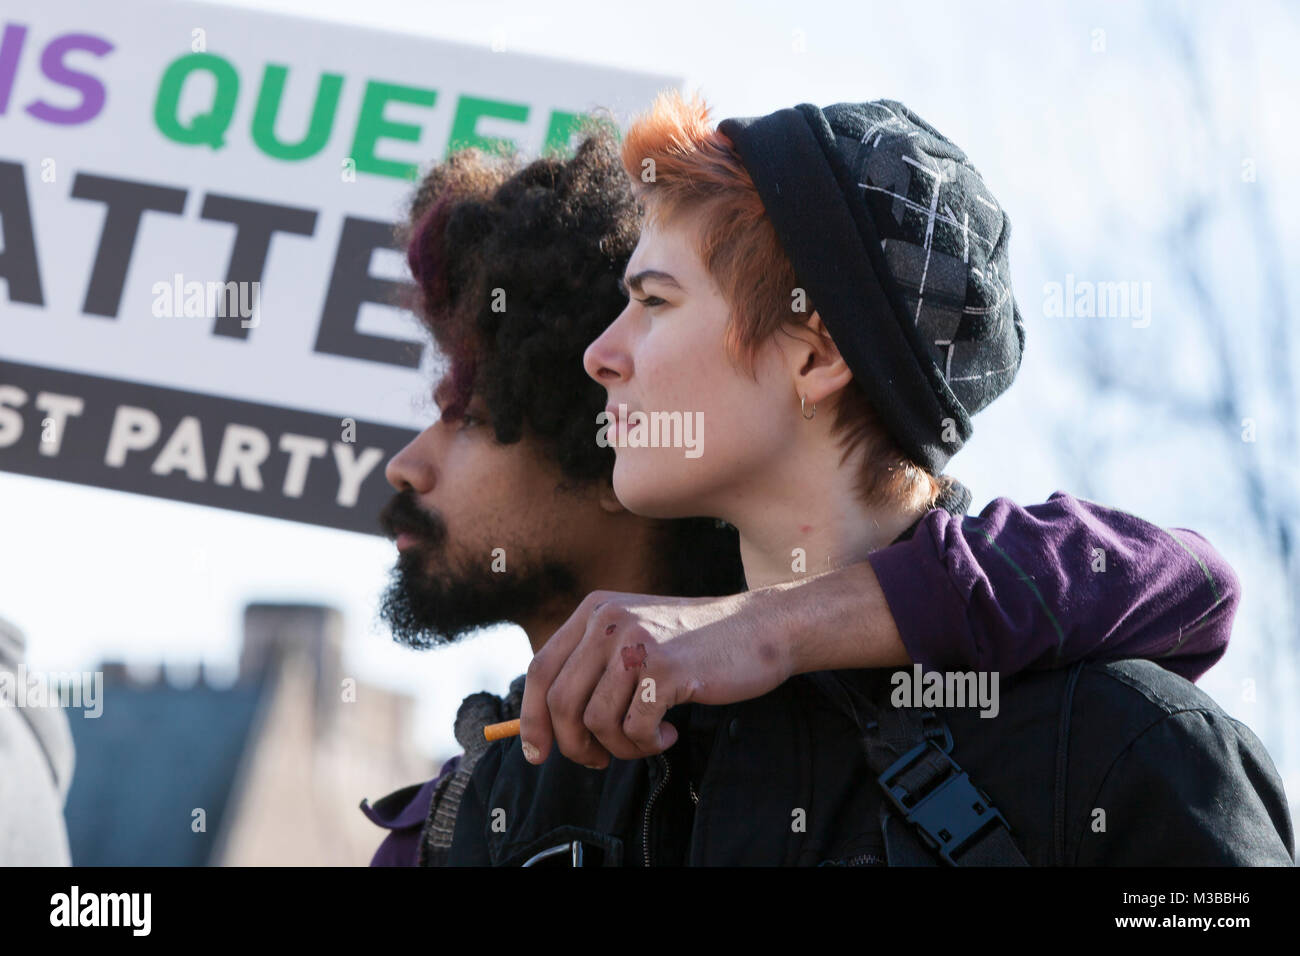 Seattle, Washington, USA. 10th February, 2018. A young couple watches the student-led counter-protest of Patriot Prayer's Freedom Rally at the University of Washington. The UW International Socialist Organization and at least dozen other UW clubs organized the counter-protest, dwarfing the Freedom Rally. Founded by Japanese-American activist Joey Gibson, the controversial conservative group, Patriot Prayer, advocates in favor of free speech and opposes big government. Credit: Paul Christian Gordon/Alamy Live News Stock Photo